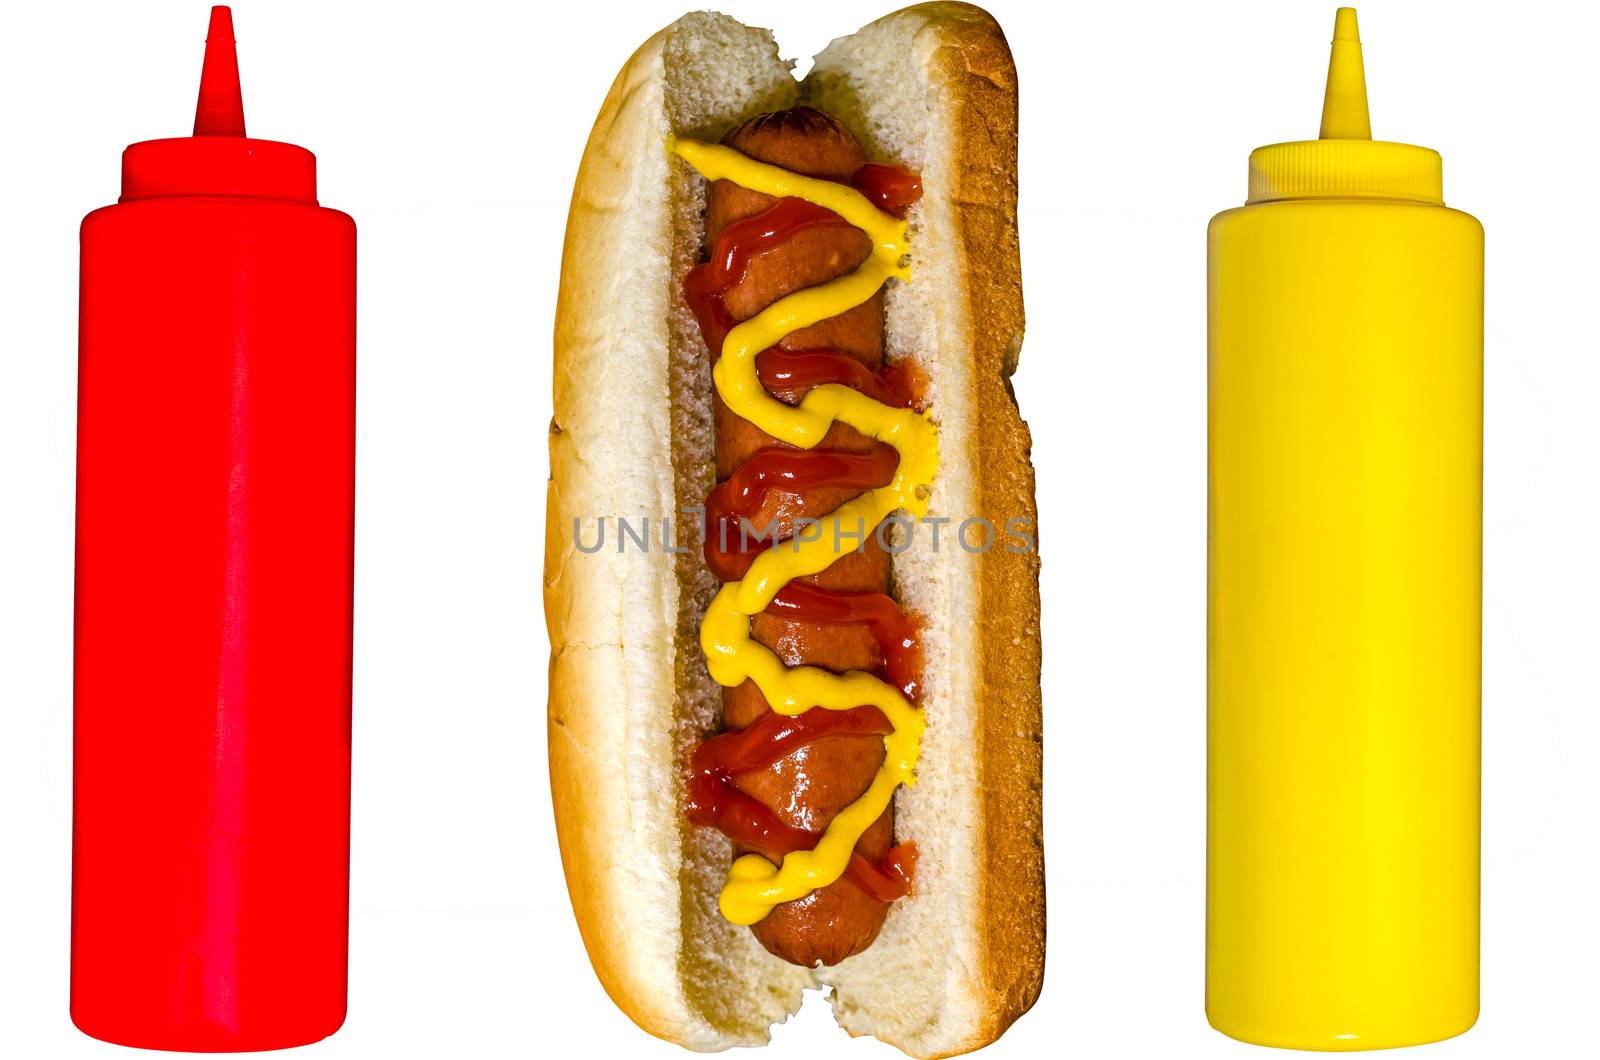 Hot Dog with Ketchup and Mustard Bottles by dehooks